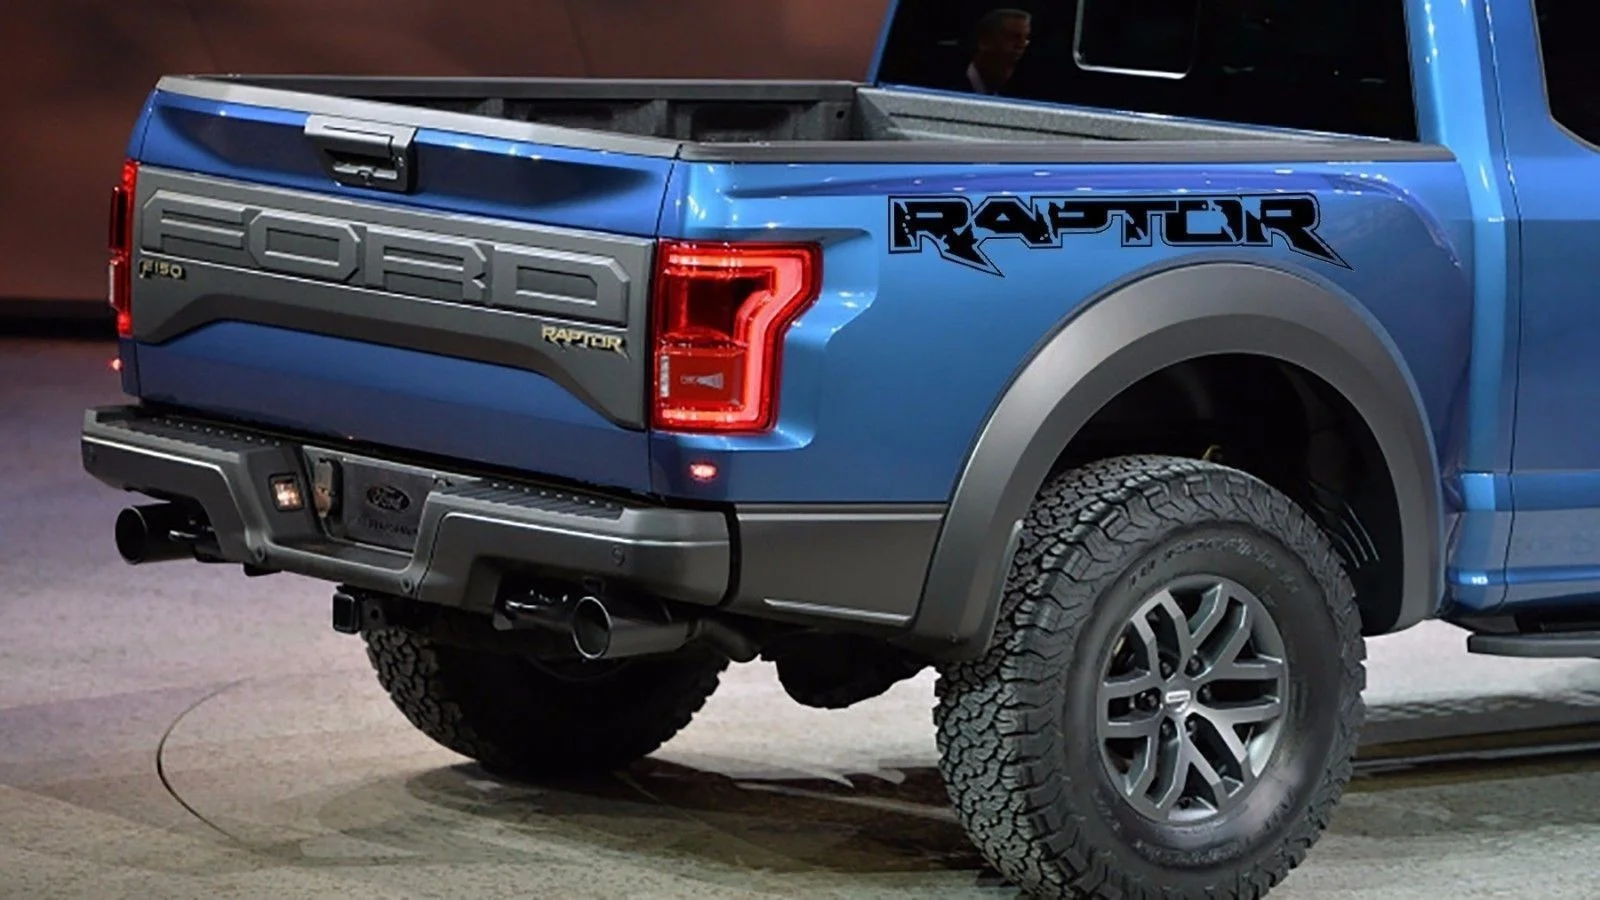 

For (2Pcs) Truck vinyl decals for Ford Raptor F-150 SVT graphics rear bed logo off road